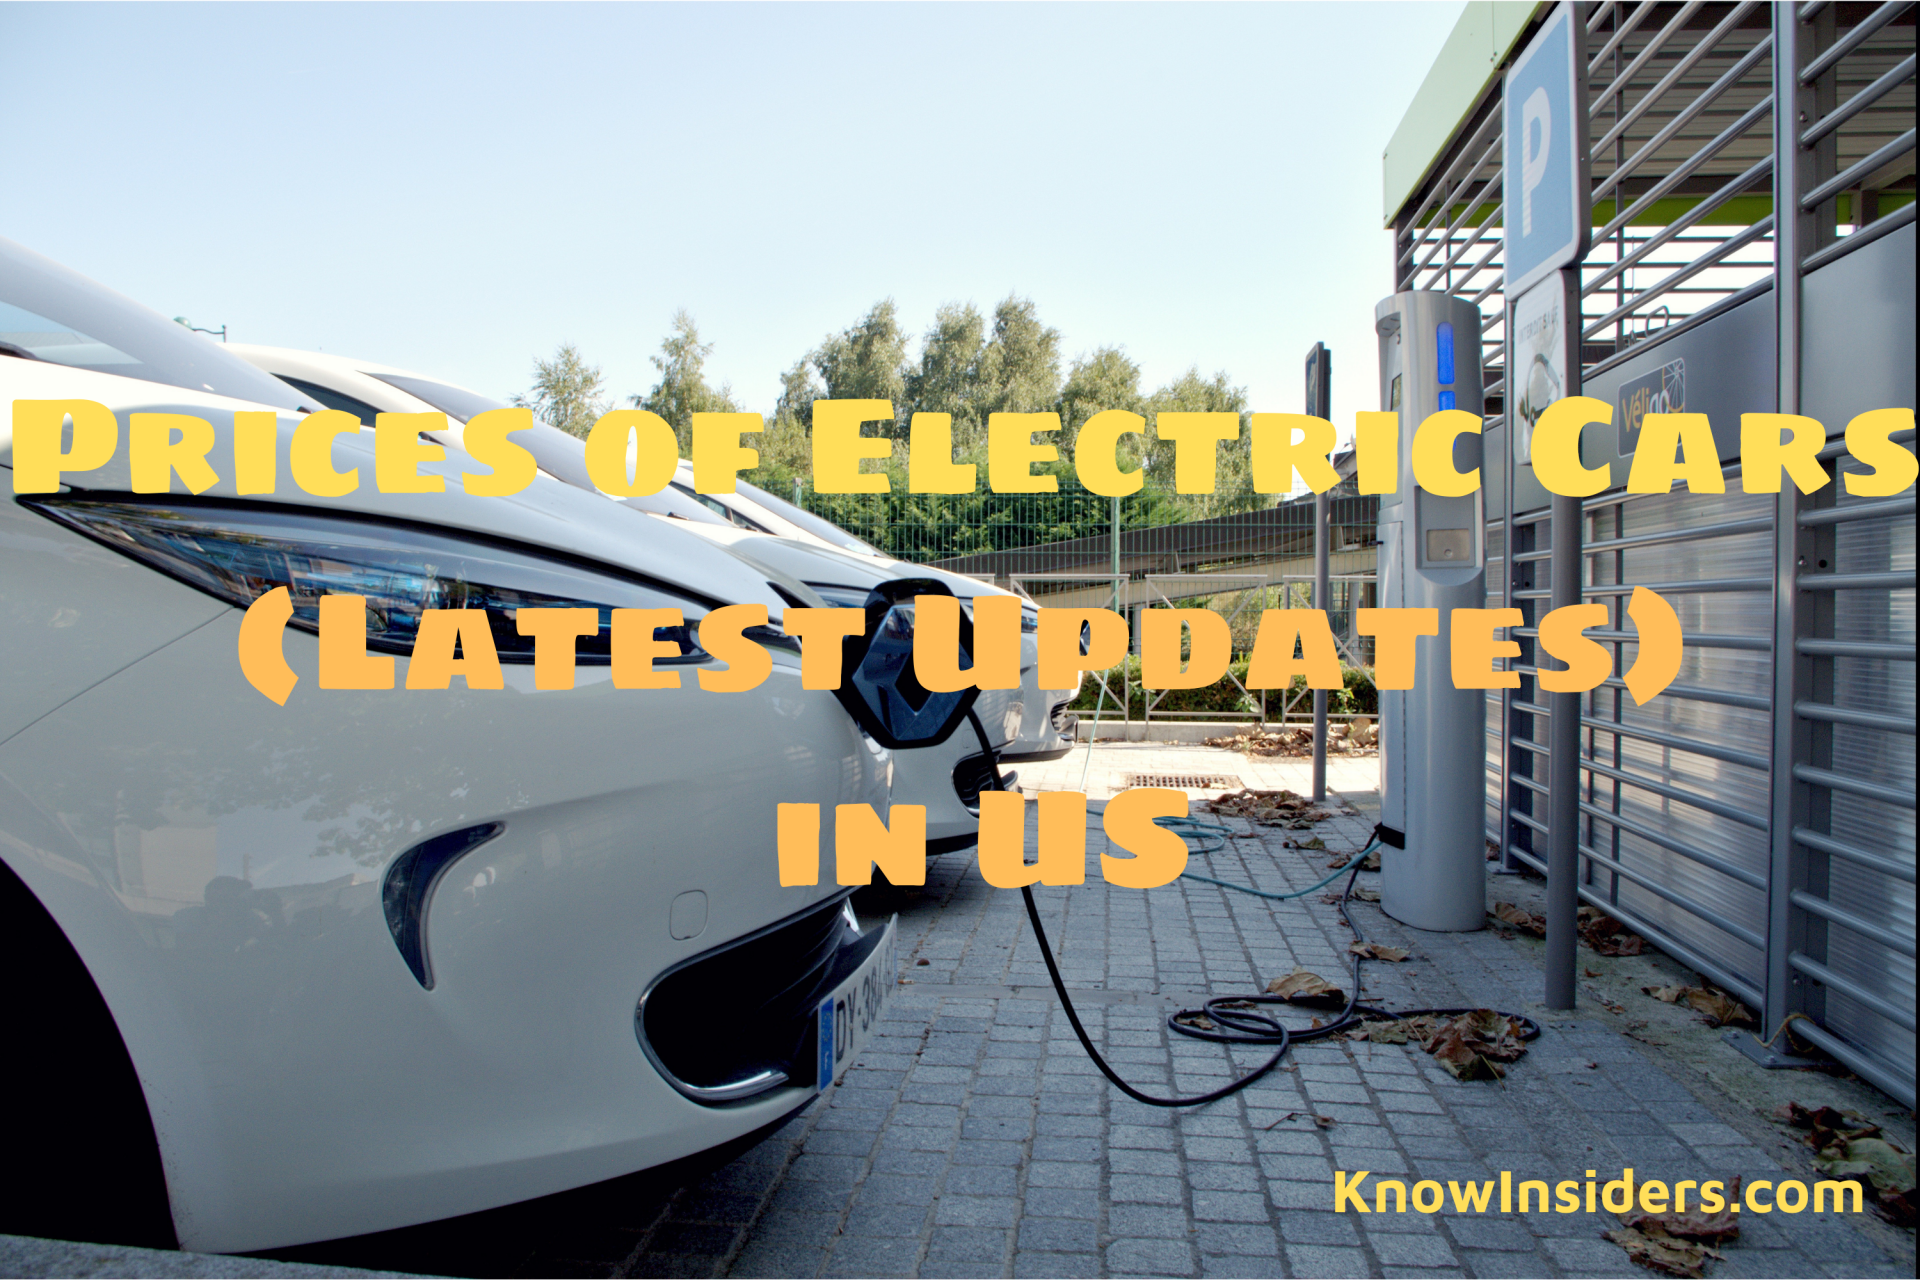 Check Latest Prices of Electric Cars in US